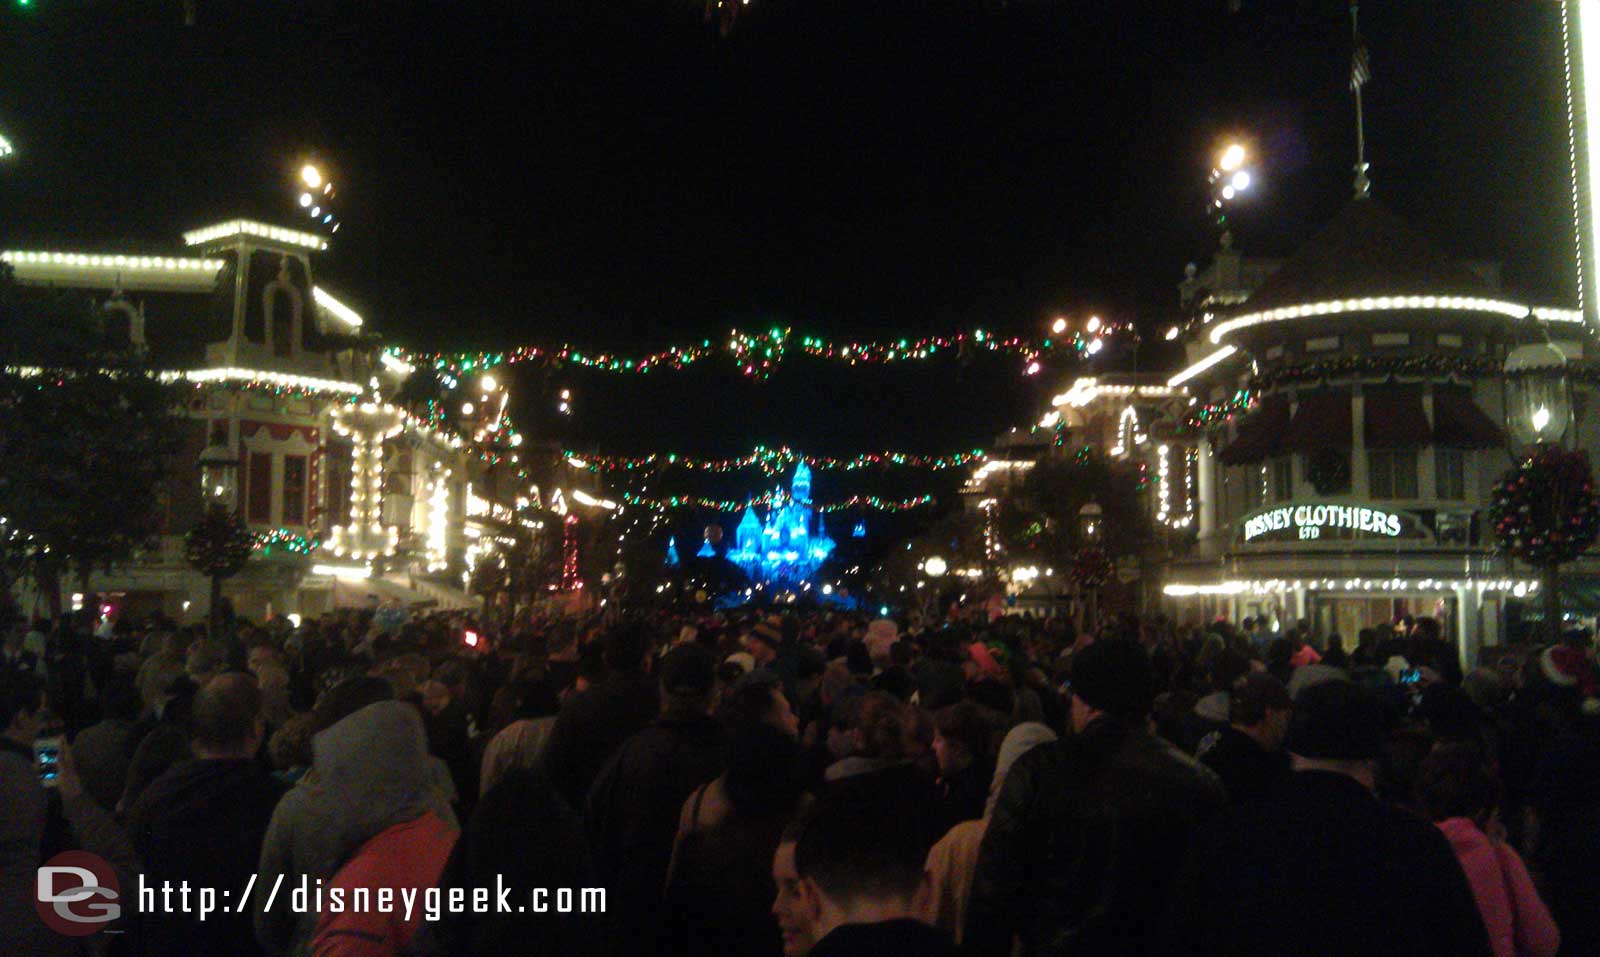 On Main Street waiting for Believe in Holiday Magic